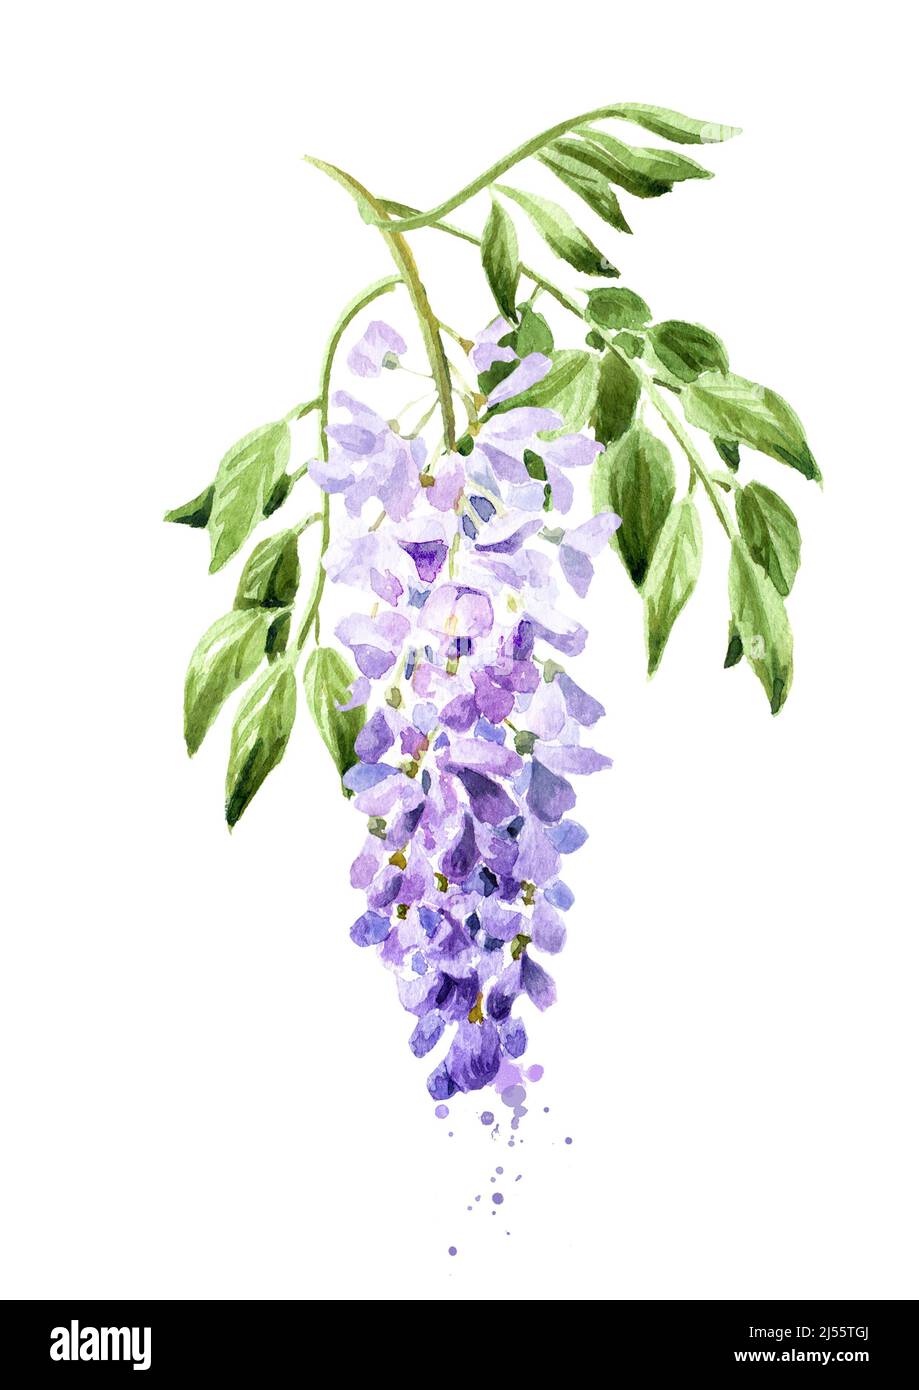 Purple pink blue wisteria flower branch blossom. Hand drawn watercolor illustration, isolated on white background Stock Photo